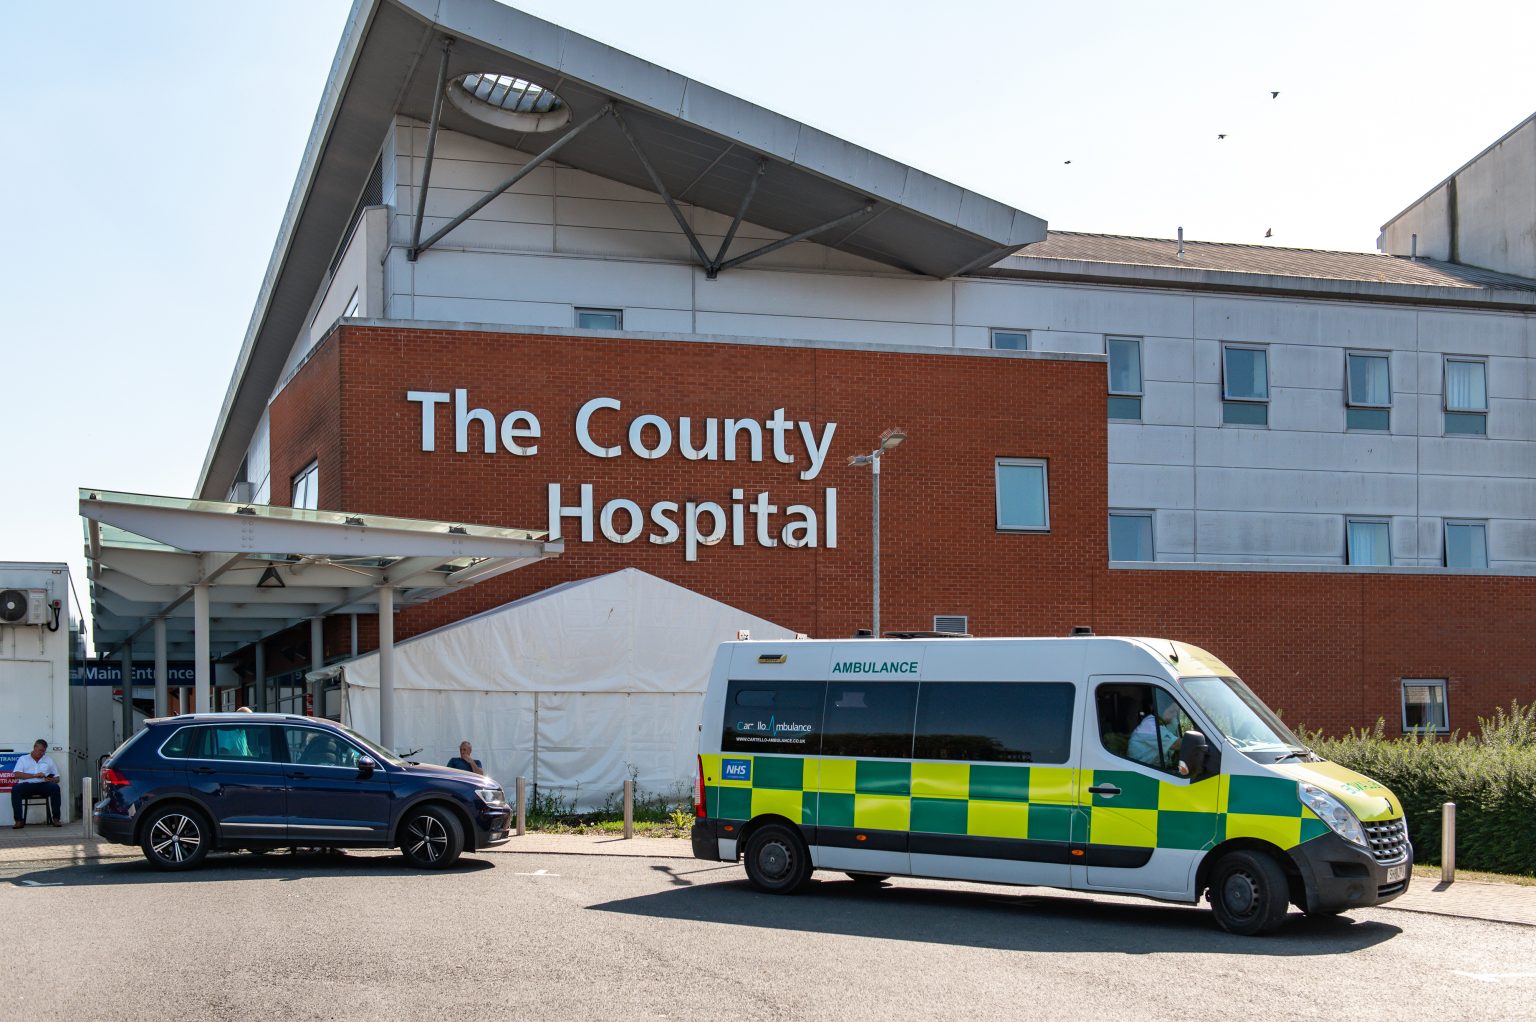 NEWS | The number of patients with COVID-19 at hospital in Herefordshire has increased with visiting now suspended on most wards